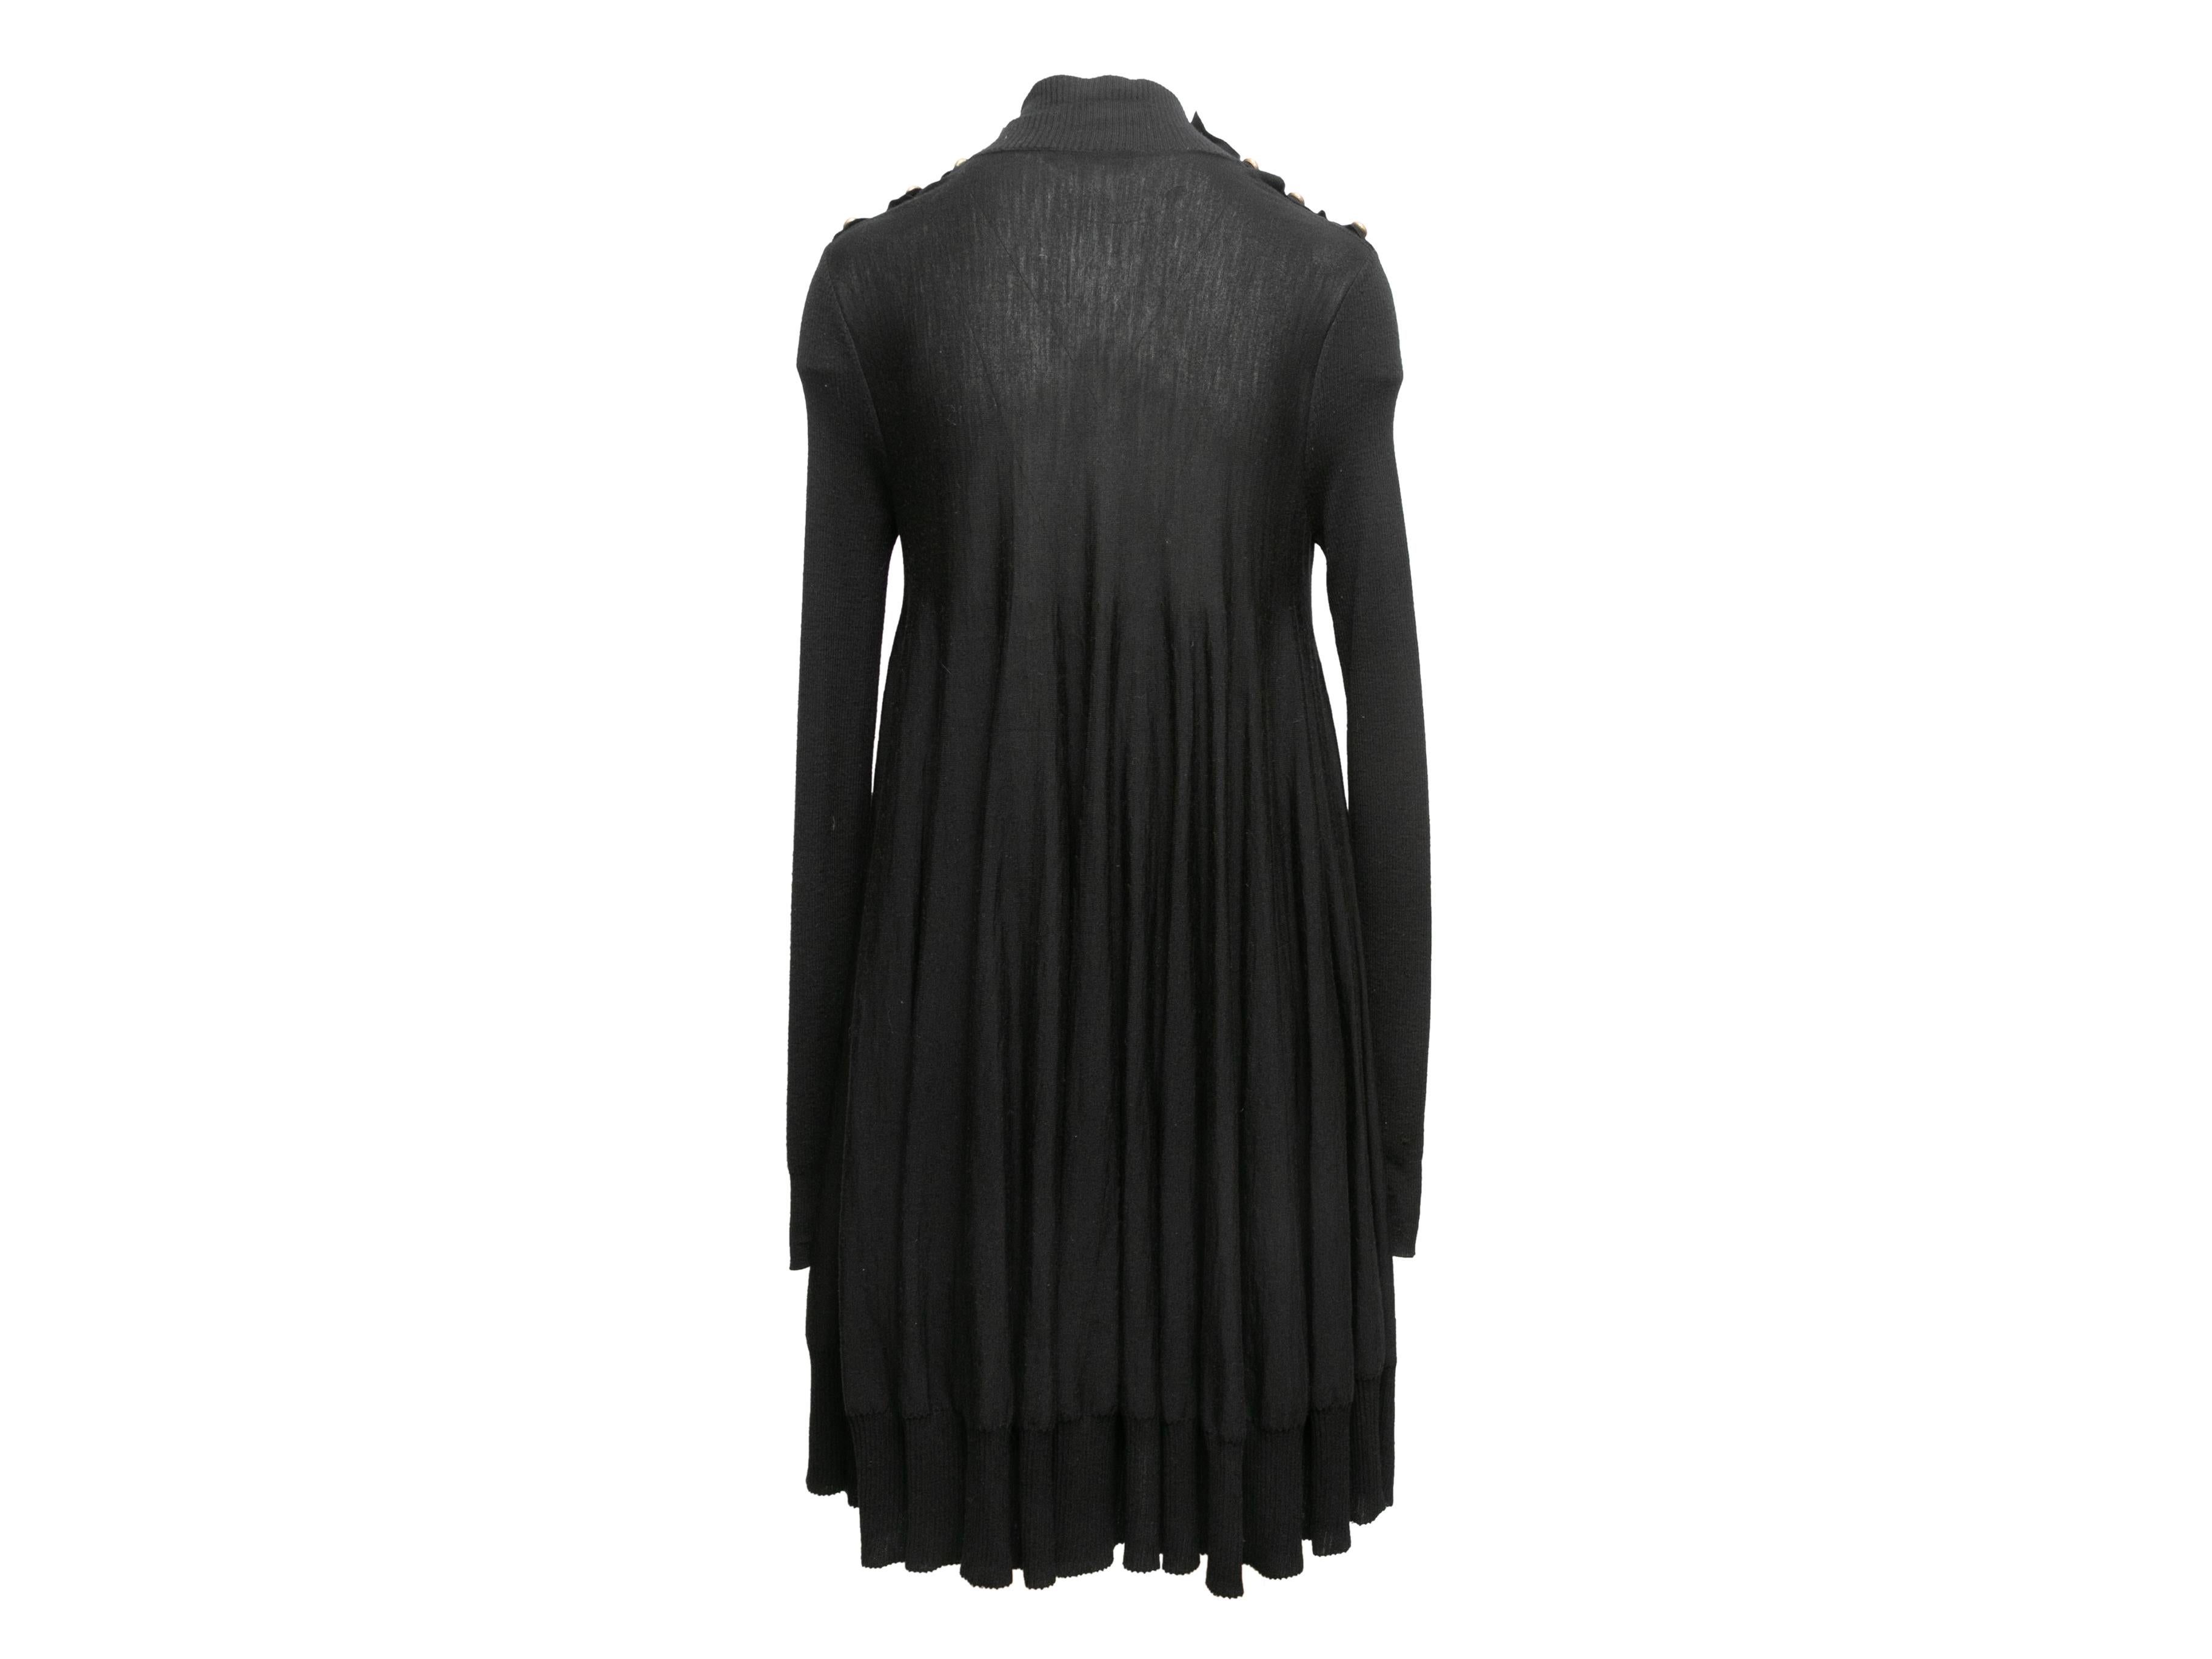 Vintage black lightweight sheer wool dress by Alexander McQueen. Mock neck. Long sleeves. Button accents at shoulders. 38